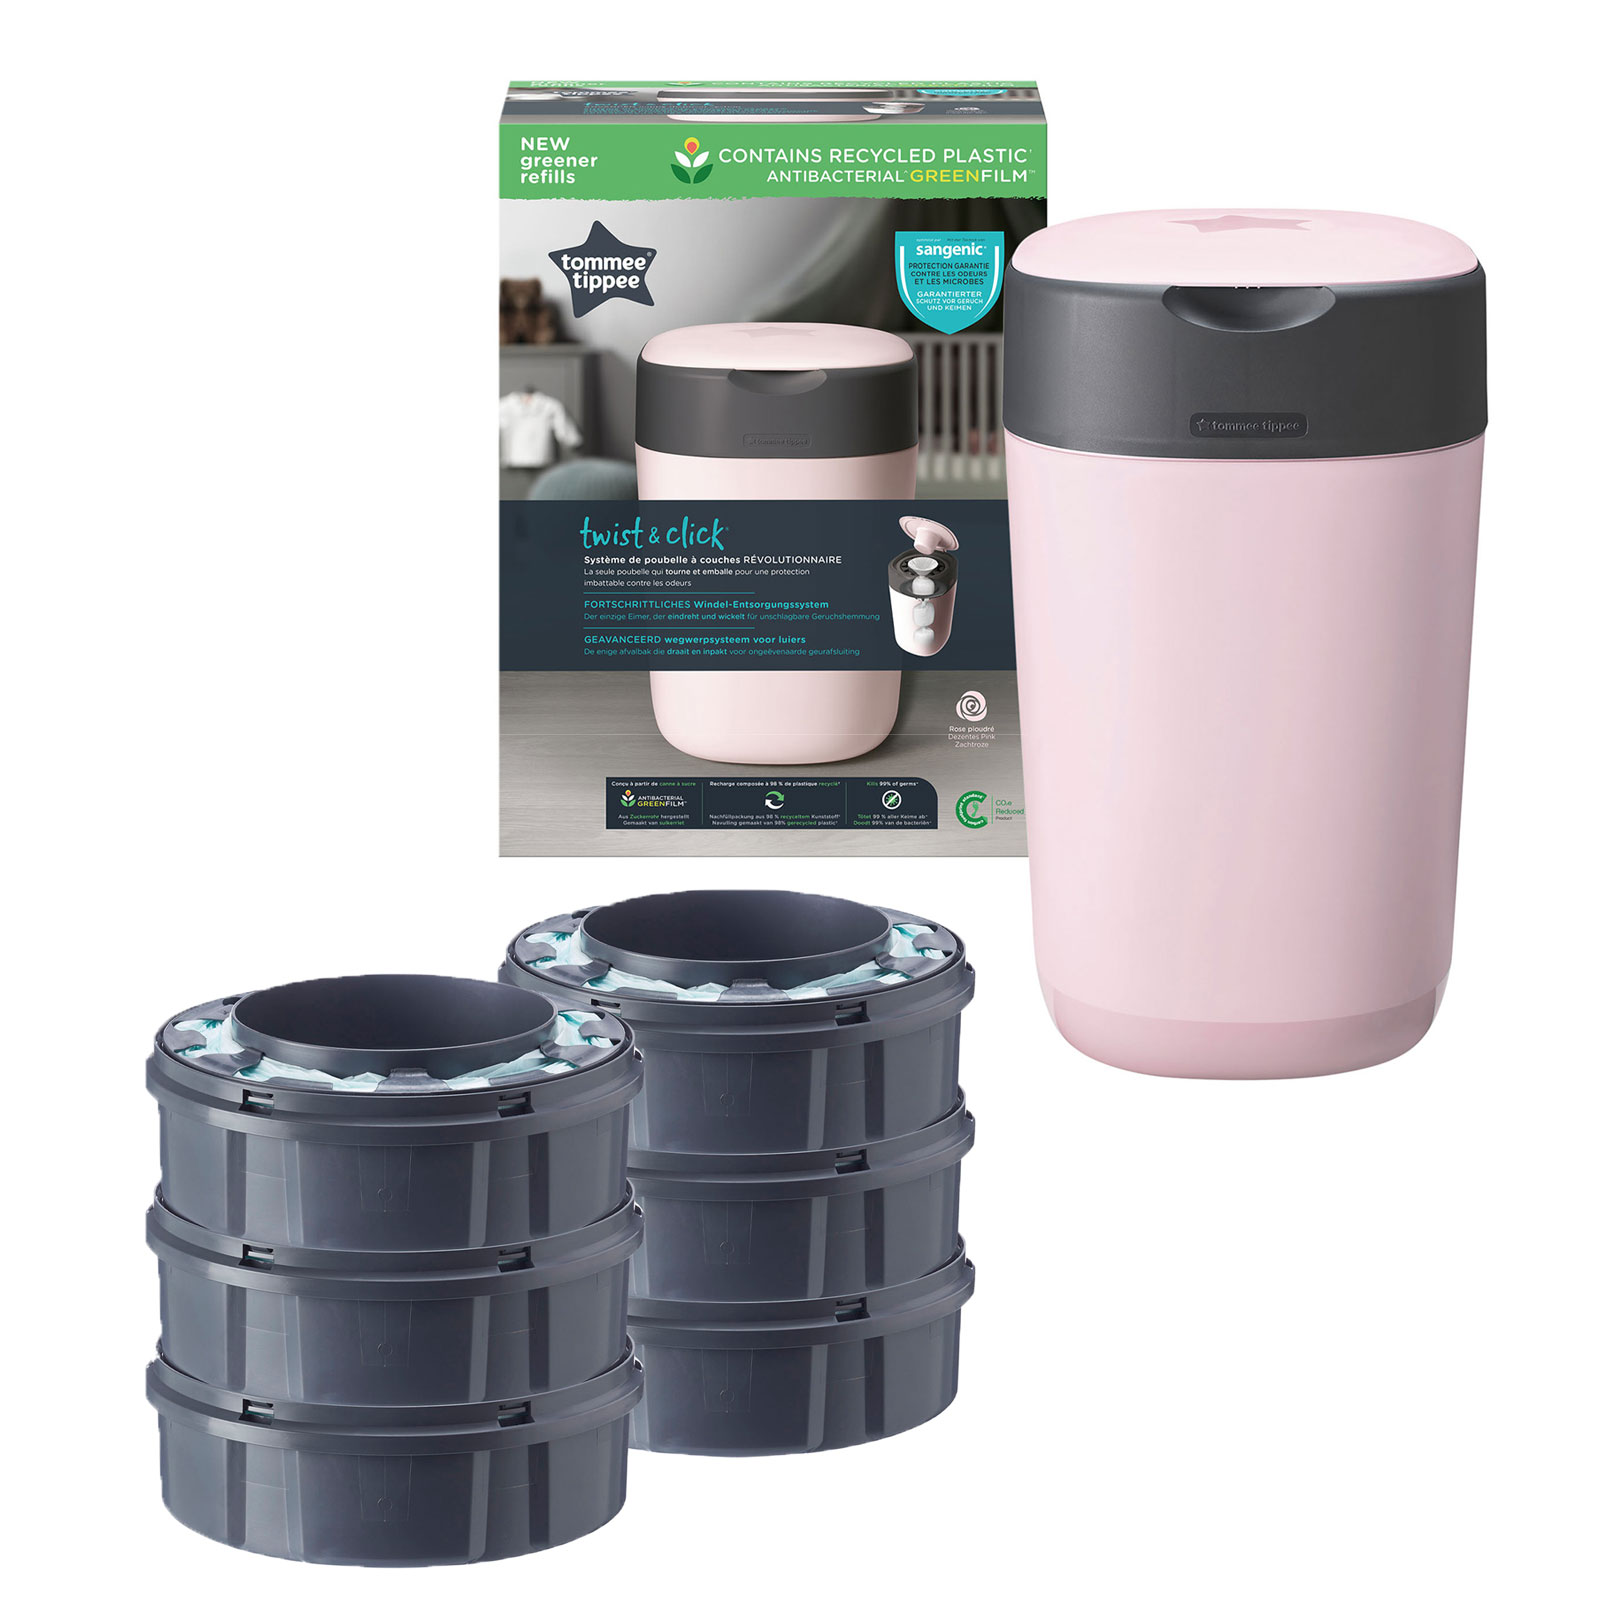 Starter pack Twist&click + 4 recharges, Tommee Tippee de Tommee Tippee